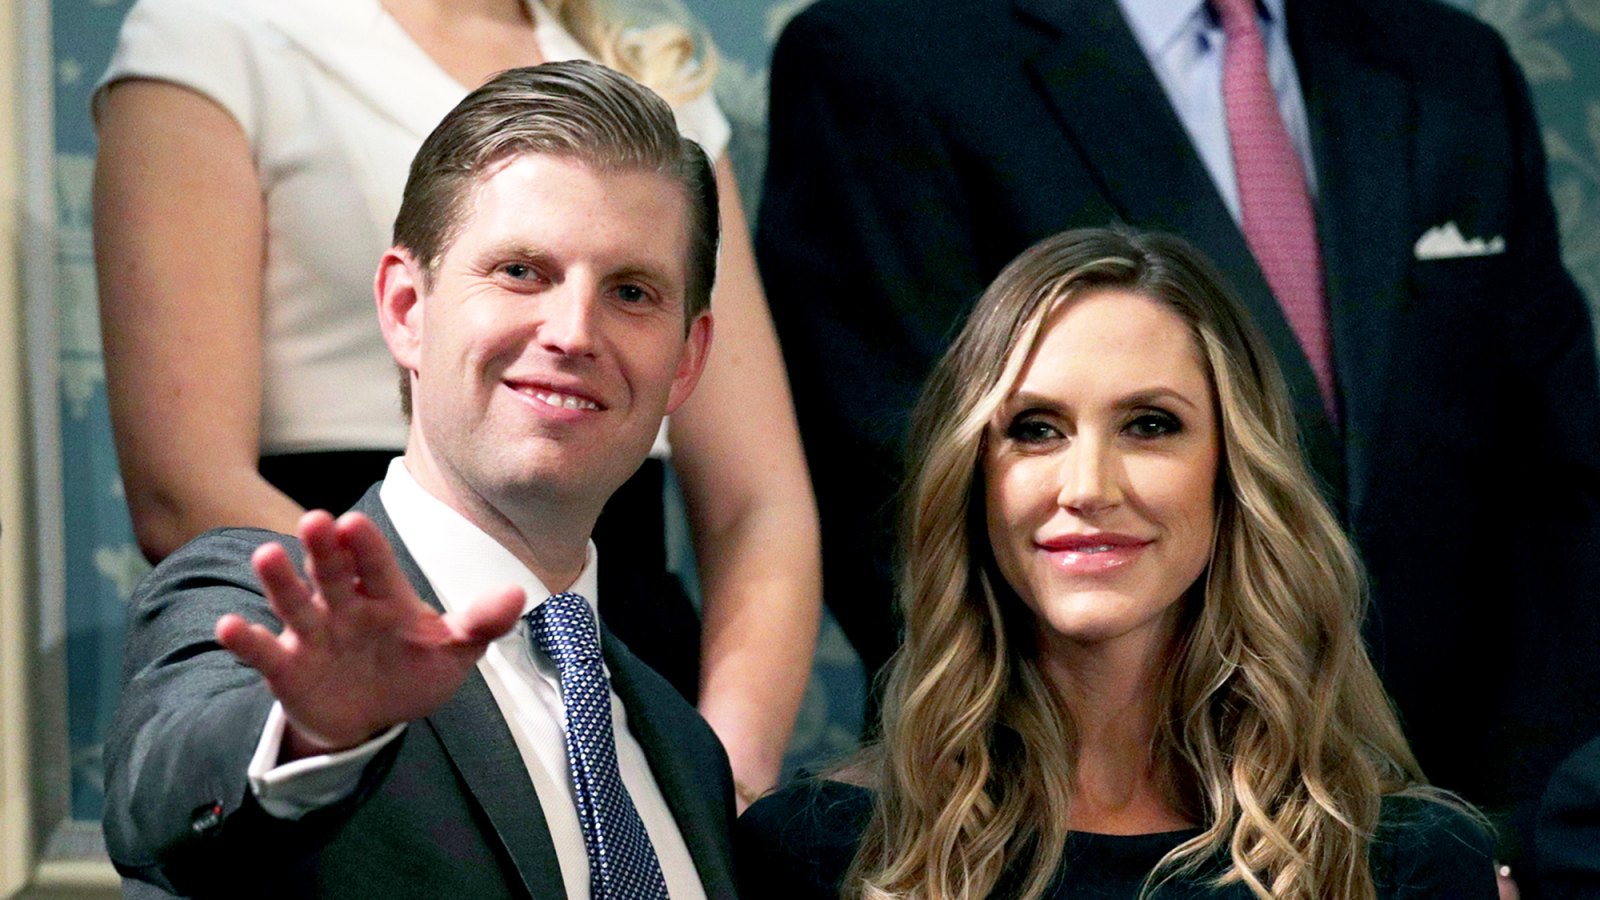 Eric Trump and Lara Trump attend the State of the Union address in the chamber of the U.S. House of Representatives January 30, 2018 in Washington, DC.